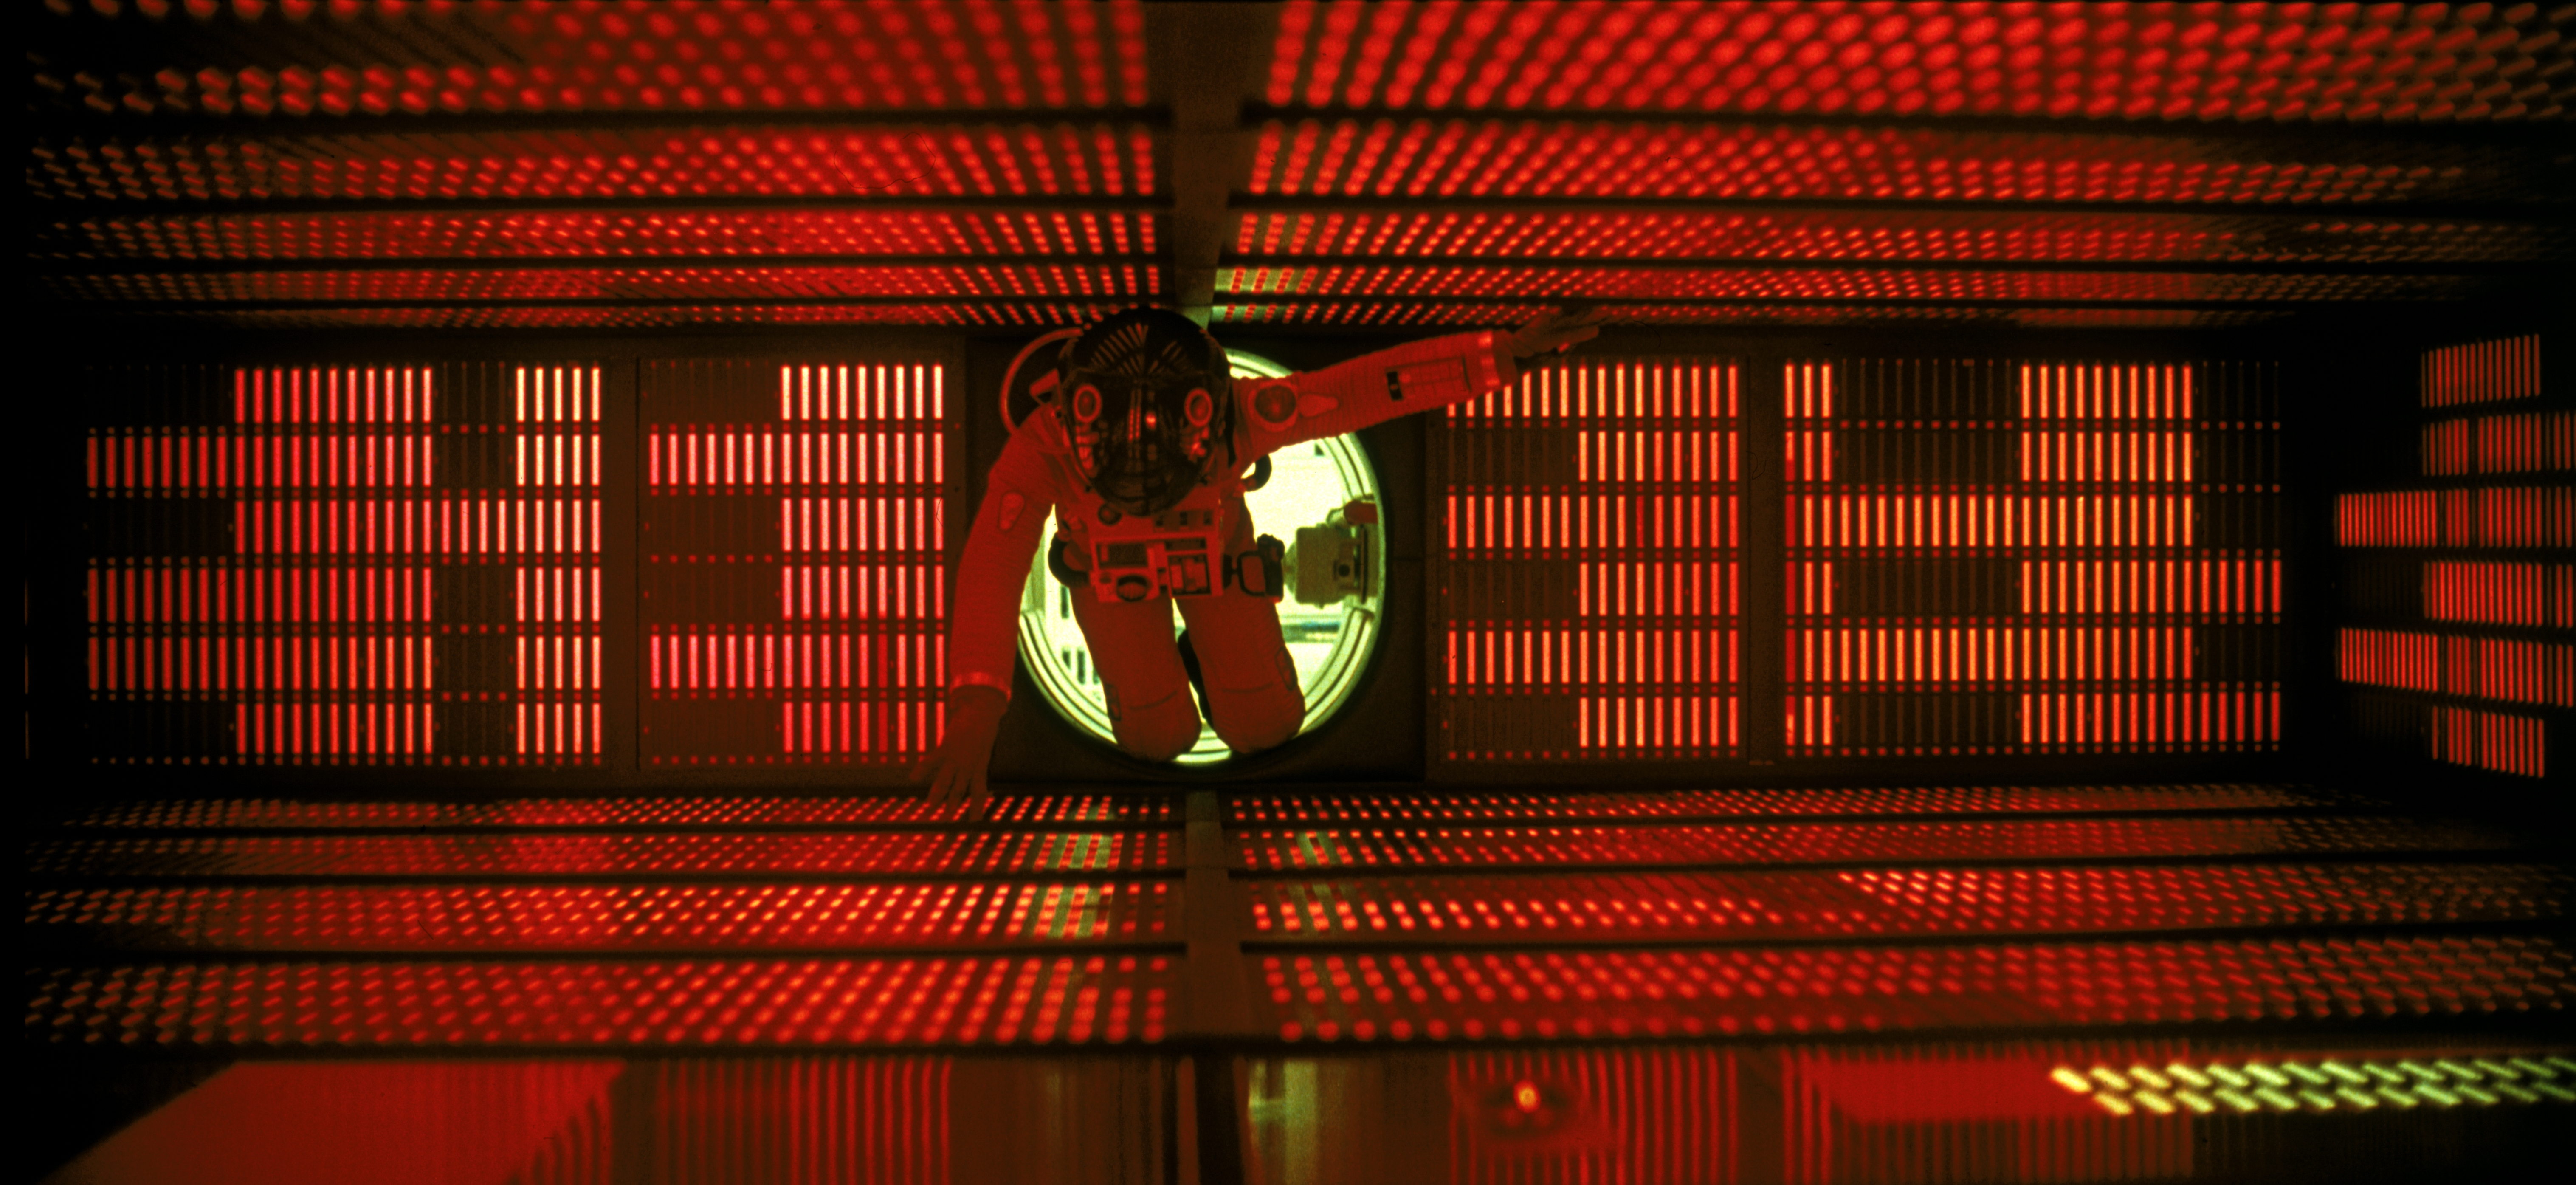 6066x2790 > 2001: A Space Odyssey Wallpapers